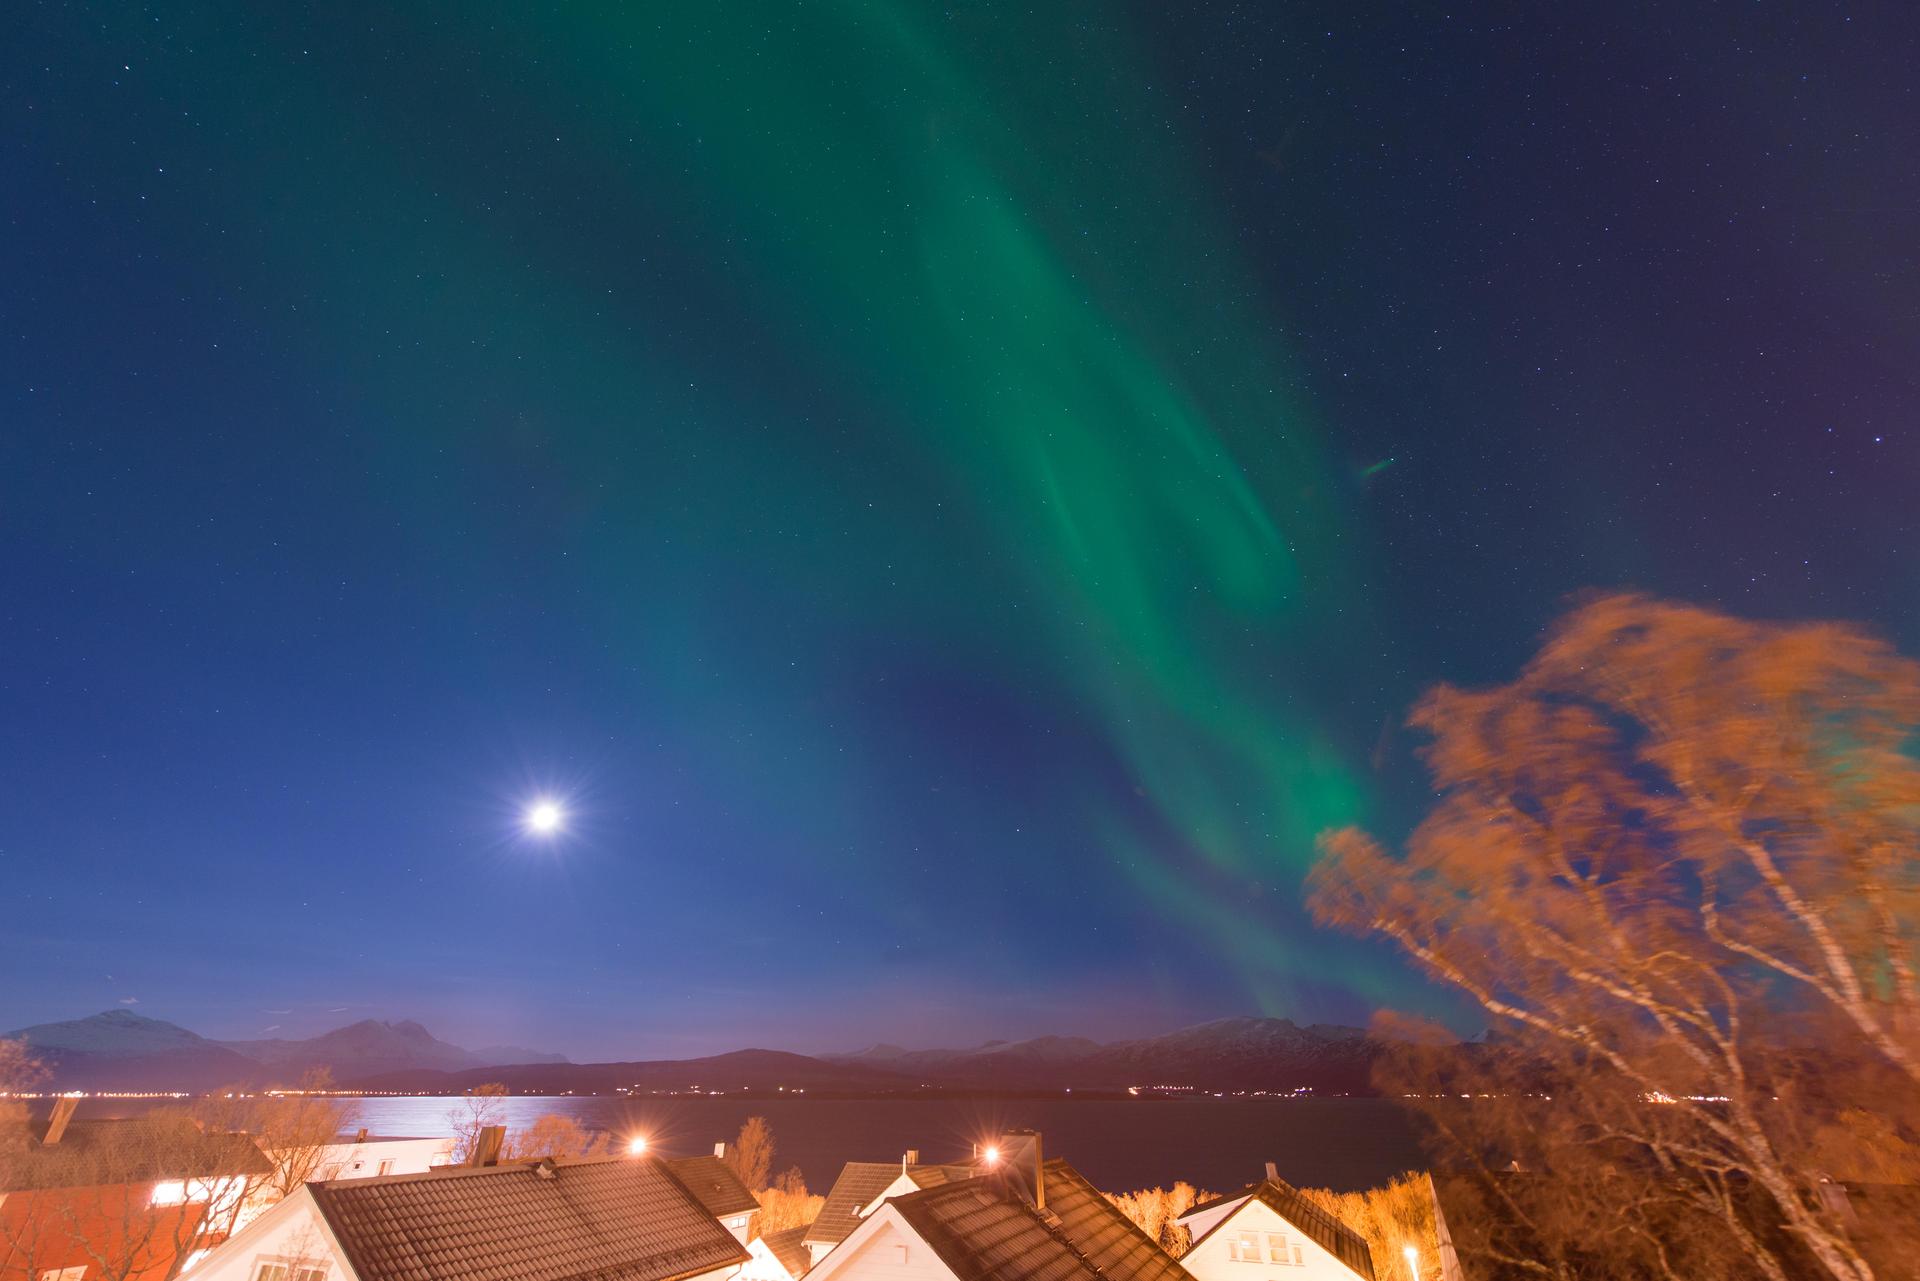 The Norwegian sky lit up by the Northern Lights and full moon. Photos: Corbis; Chris Graham; Truls Tiller